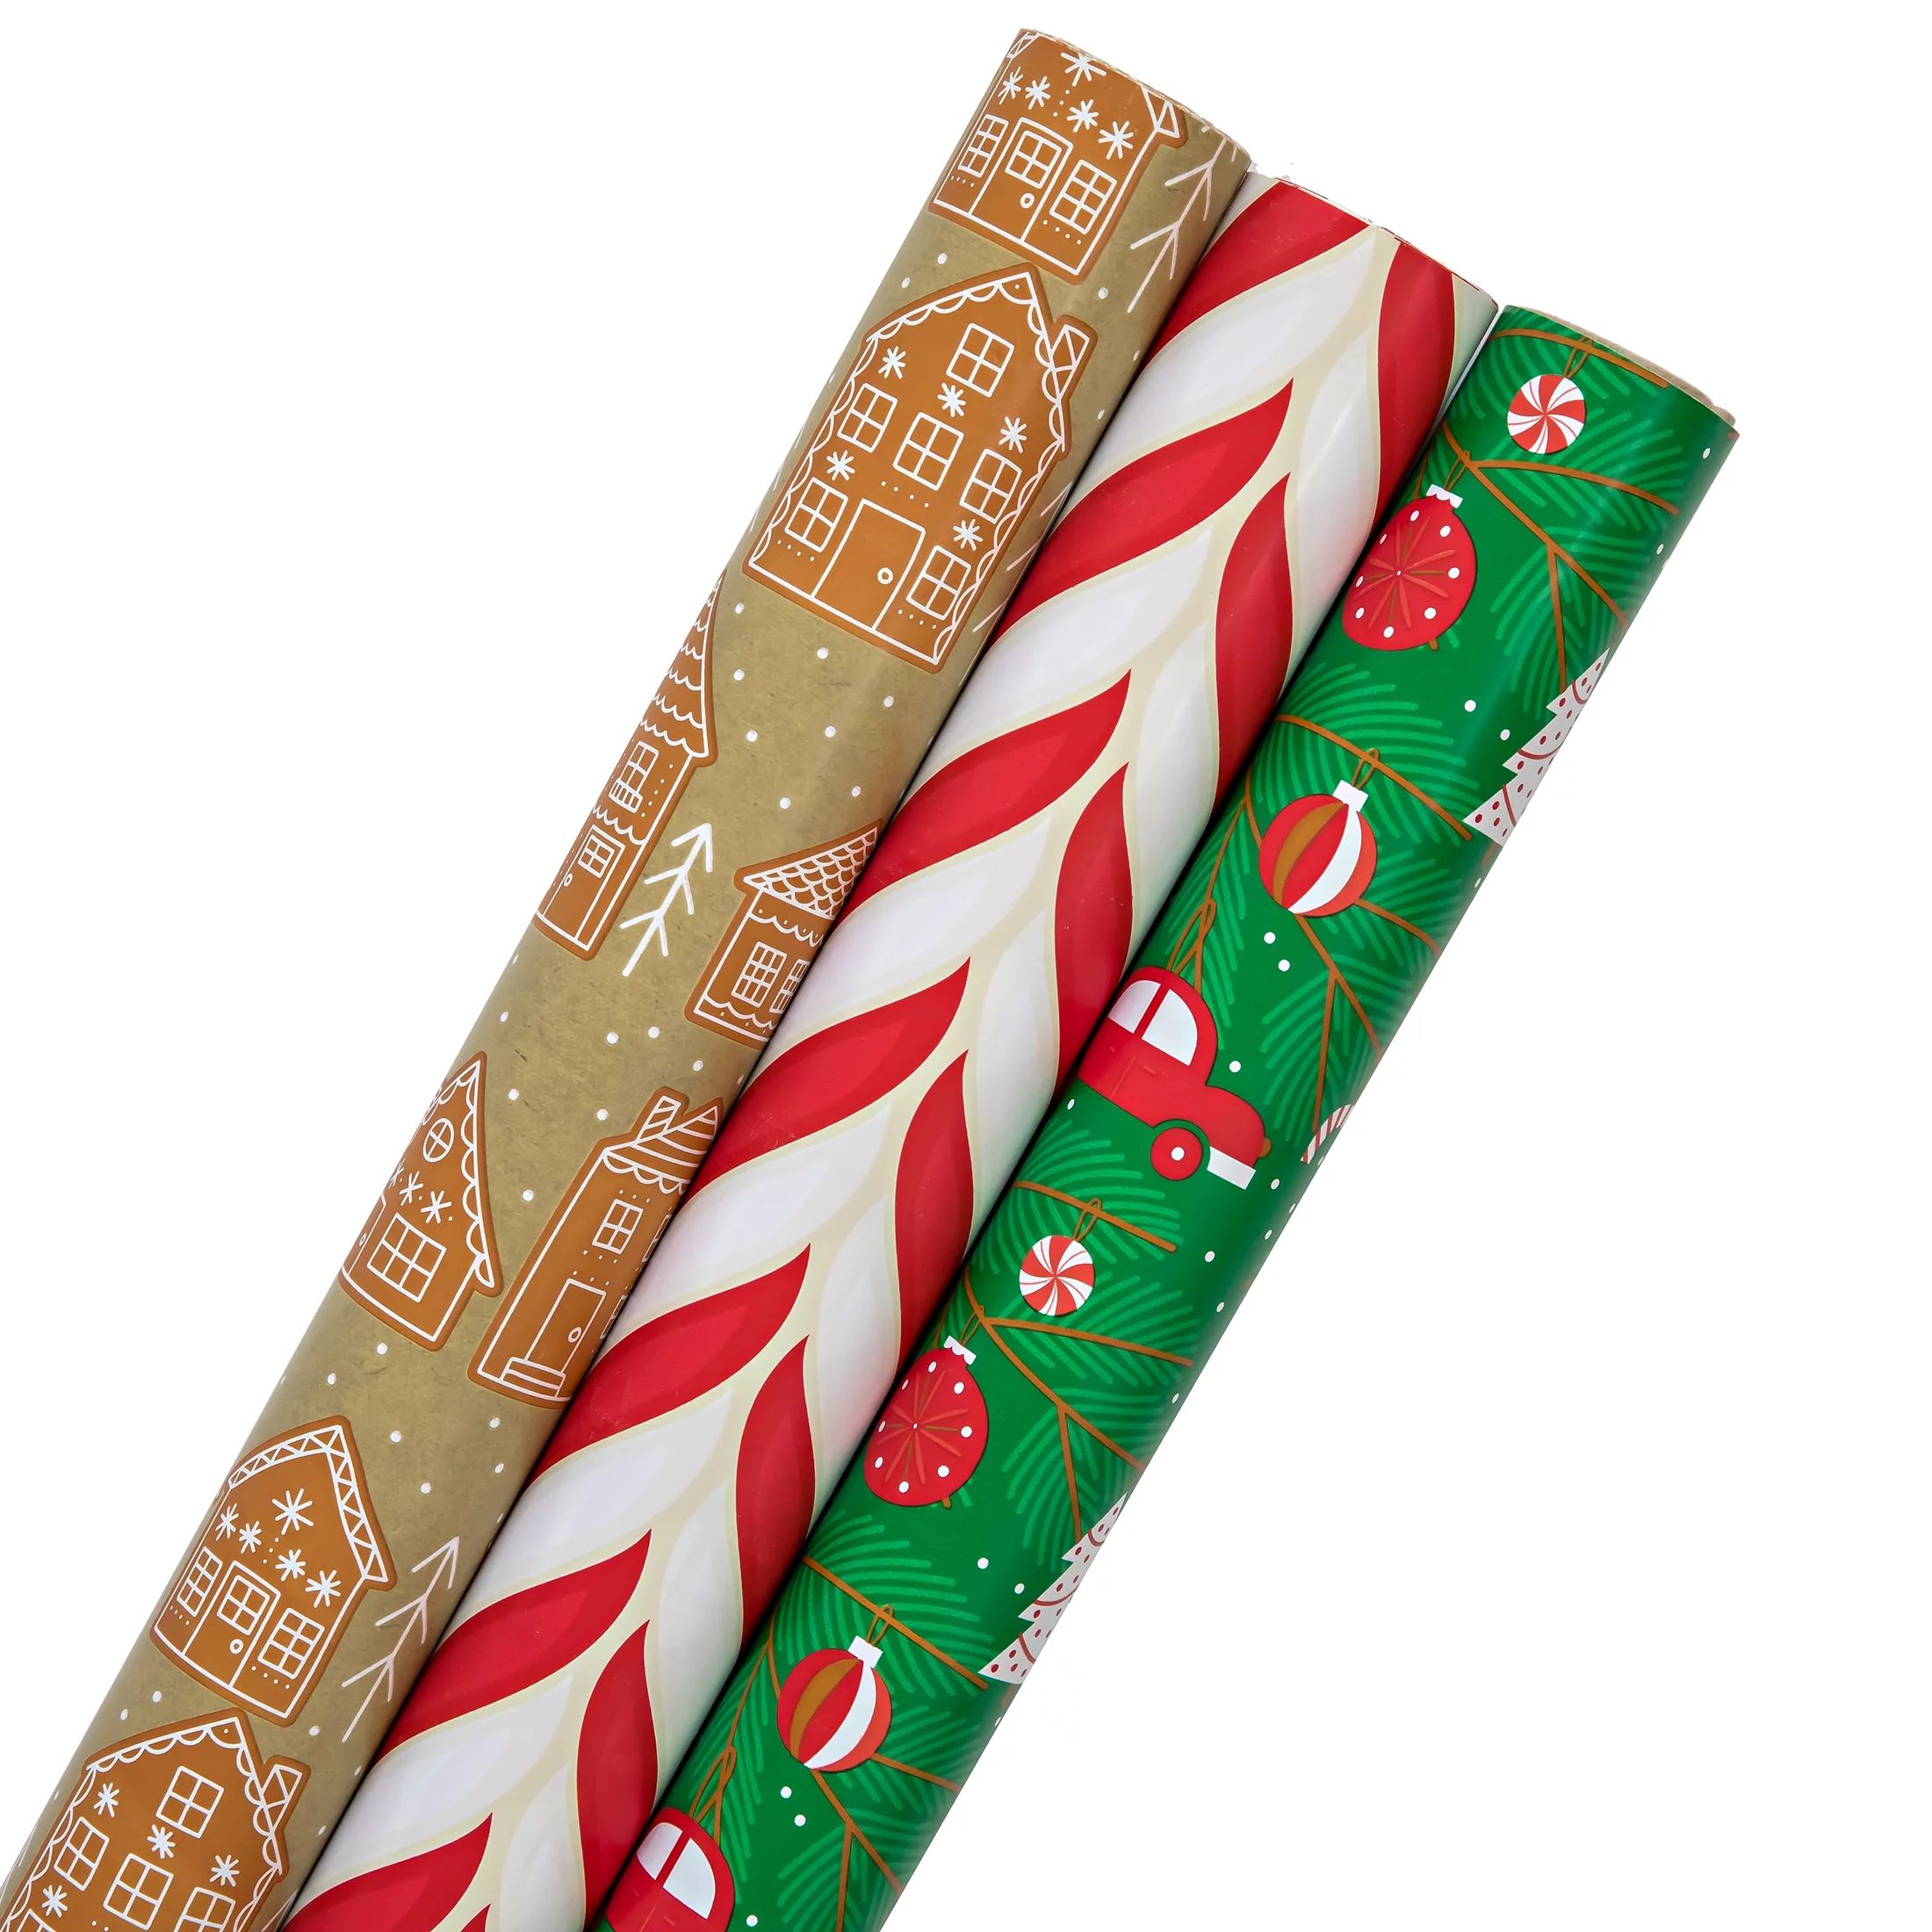 Holiday Time Premium Scented Gift Wrapping Paper, 3 Rolls, Peppermint, Gingerbread, and Christmas... | Walmart (US)